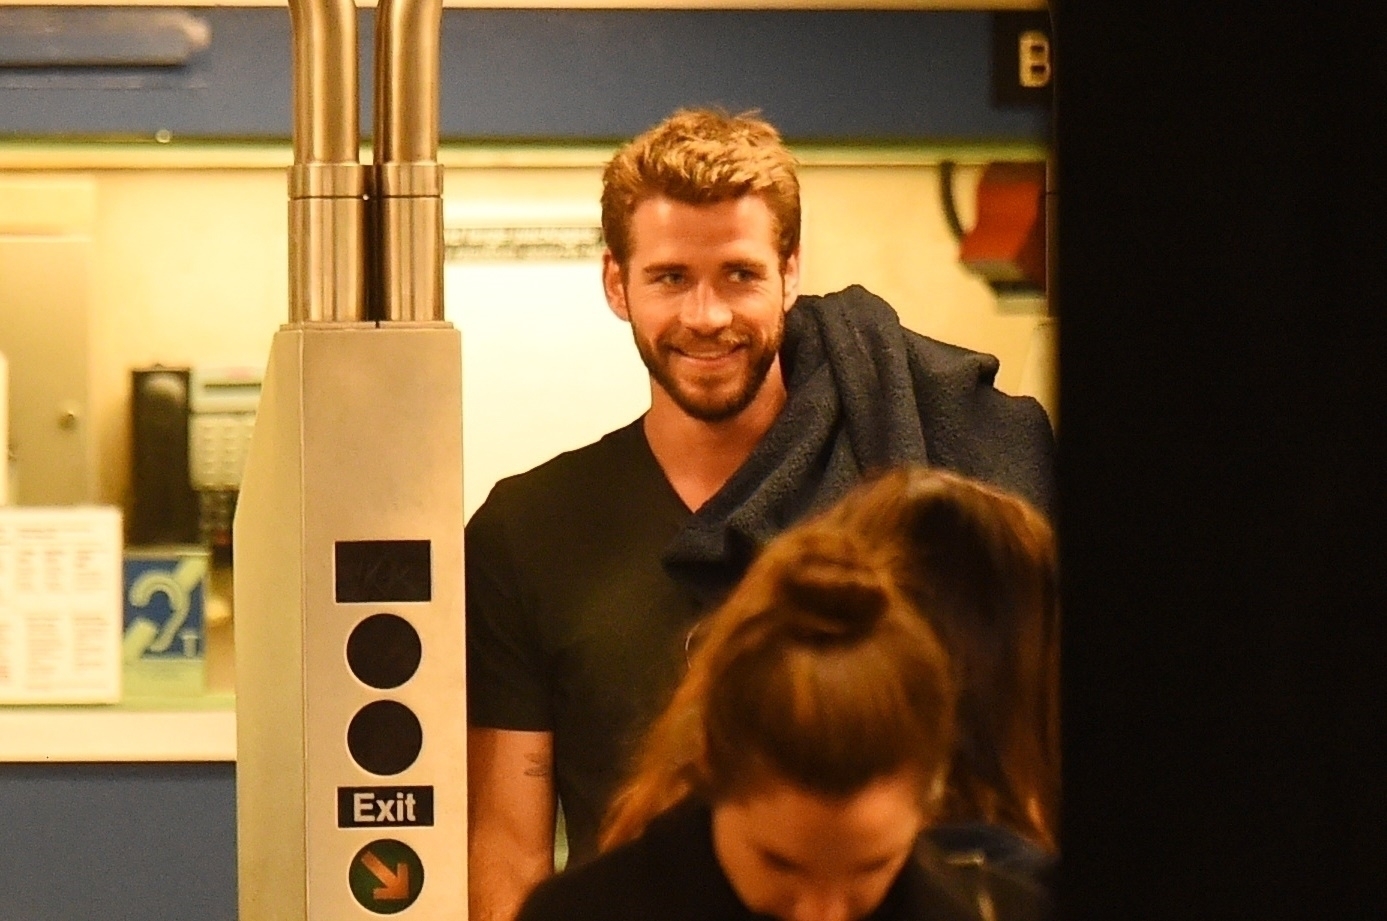 Liam Hemsworth/The Grosby Group